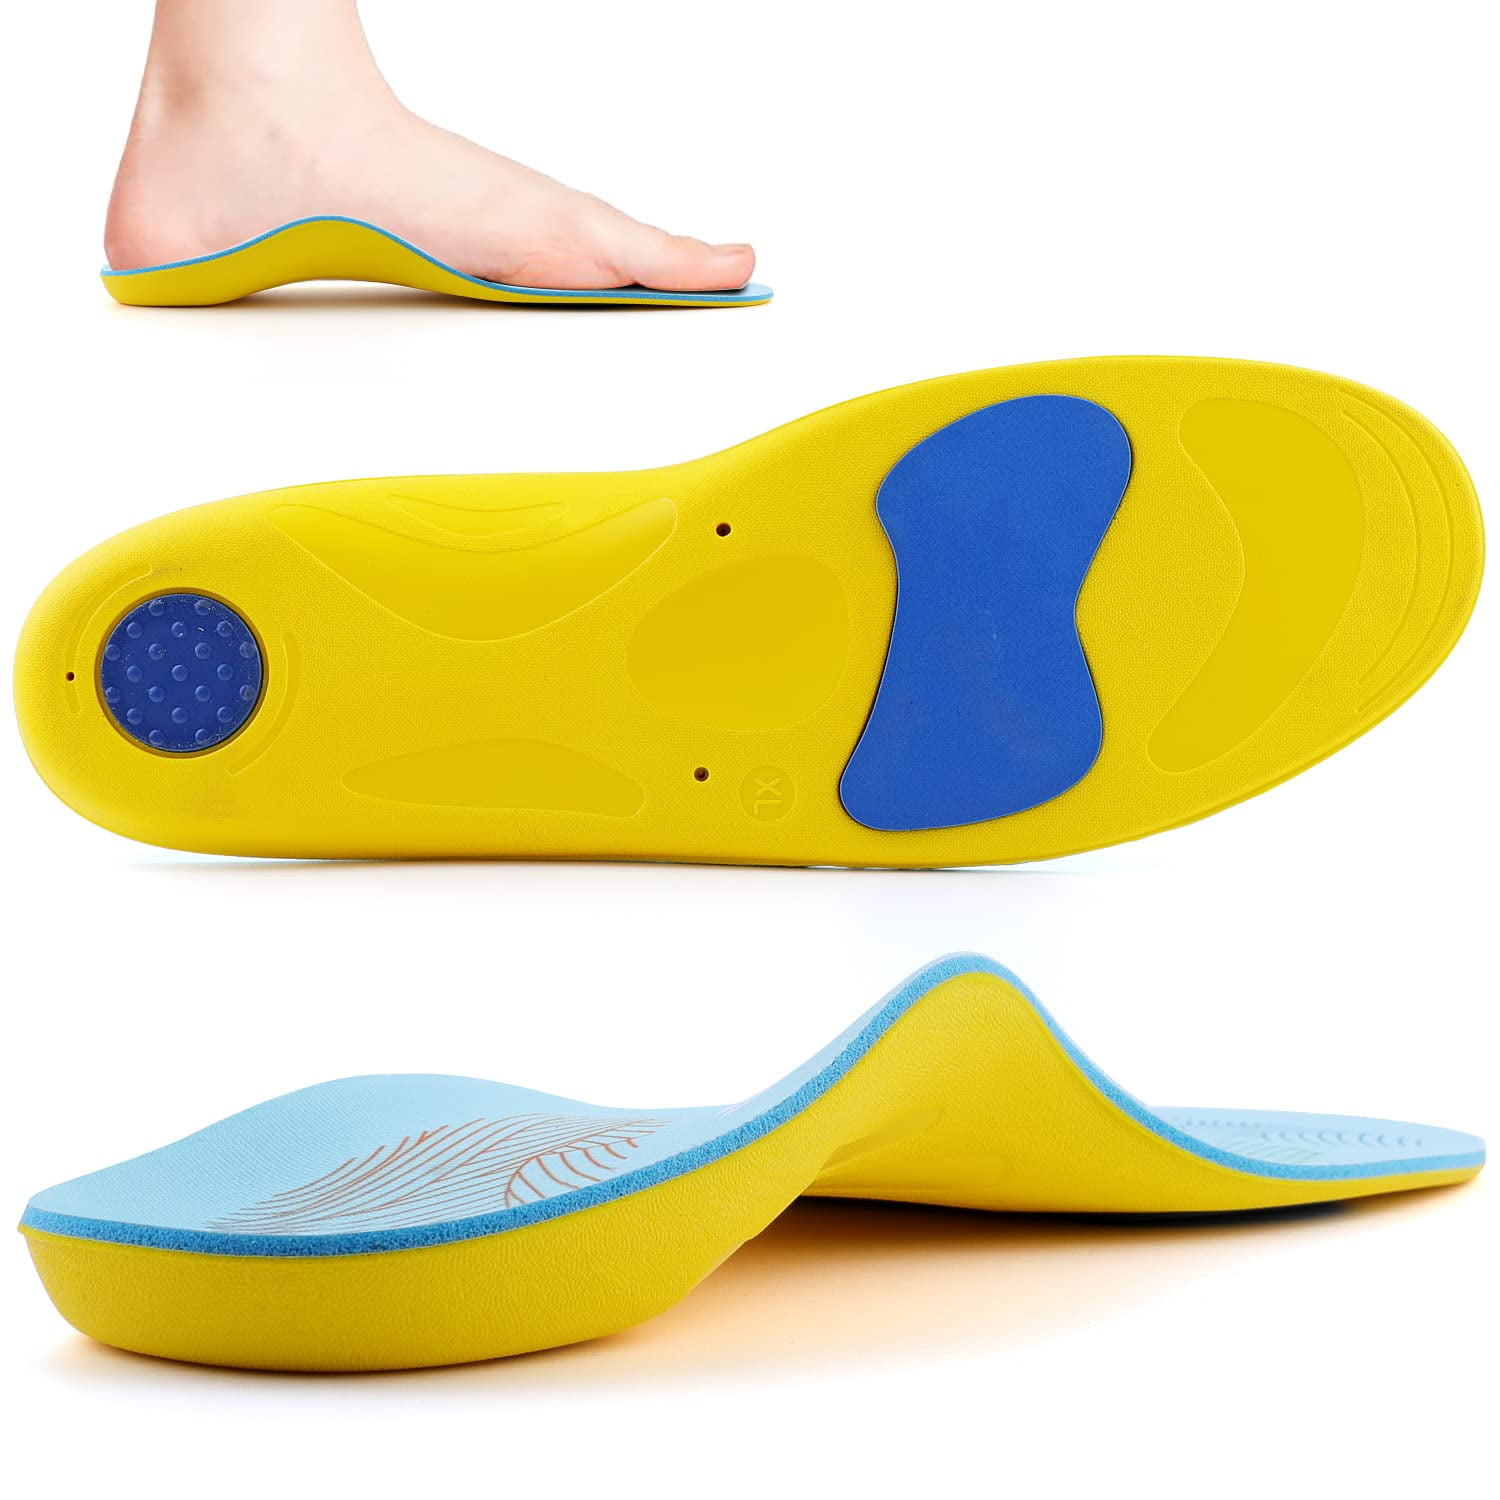 Walkomfy Pain Relief Orthotics,Plantar Fasciitis High Arch Support ...